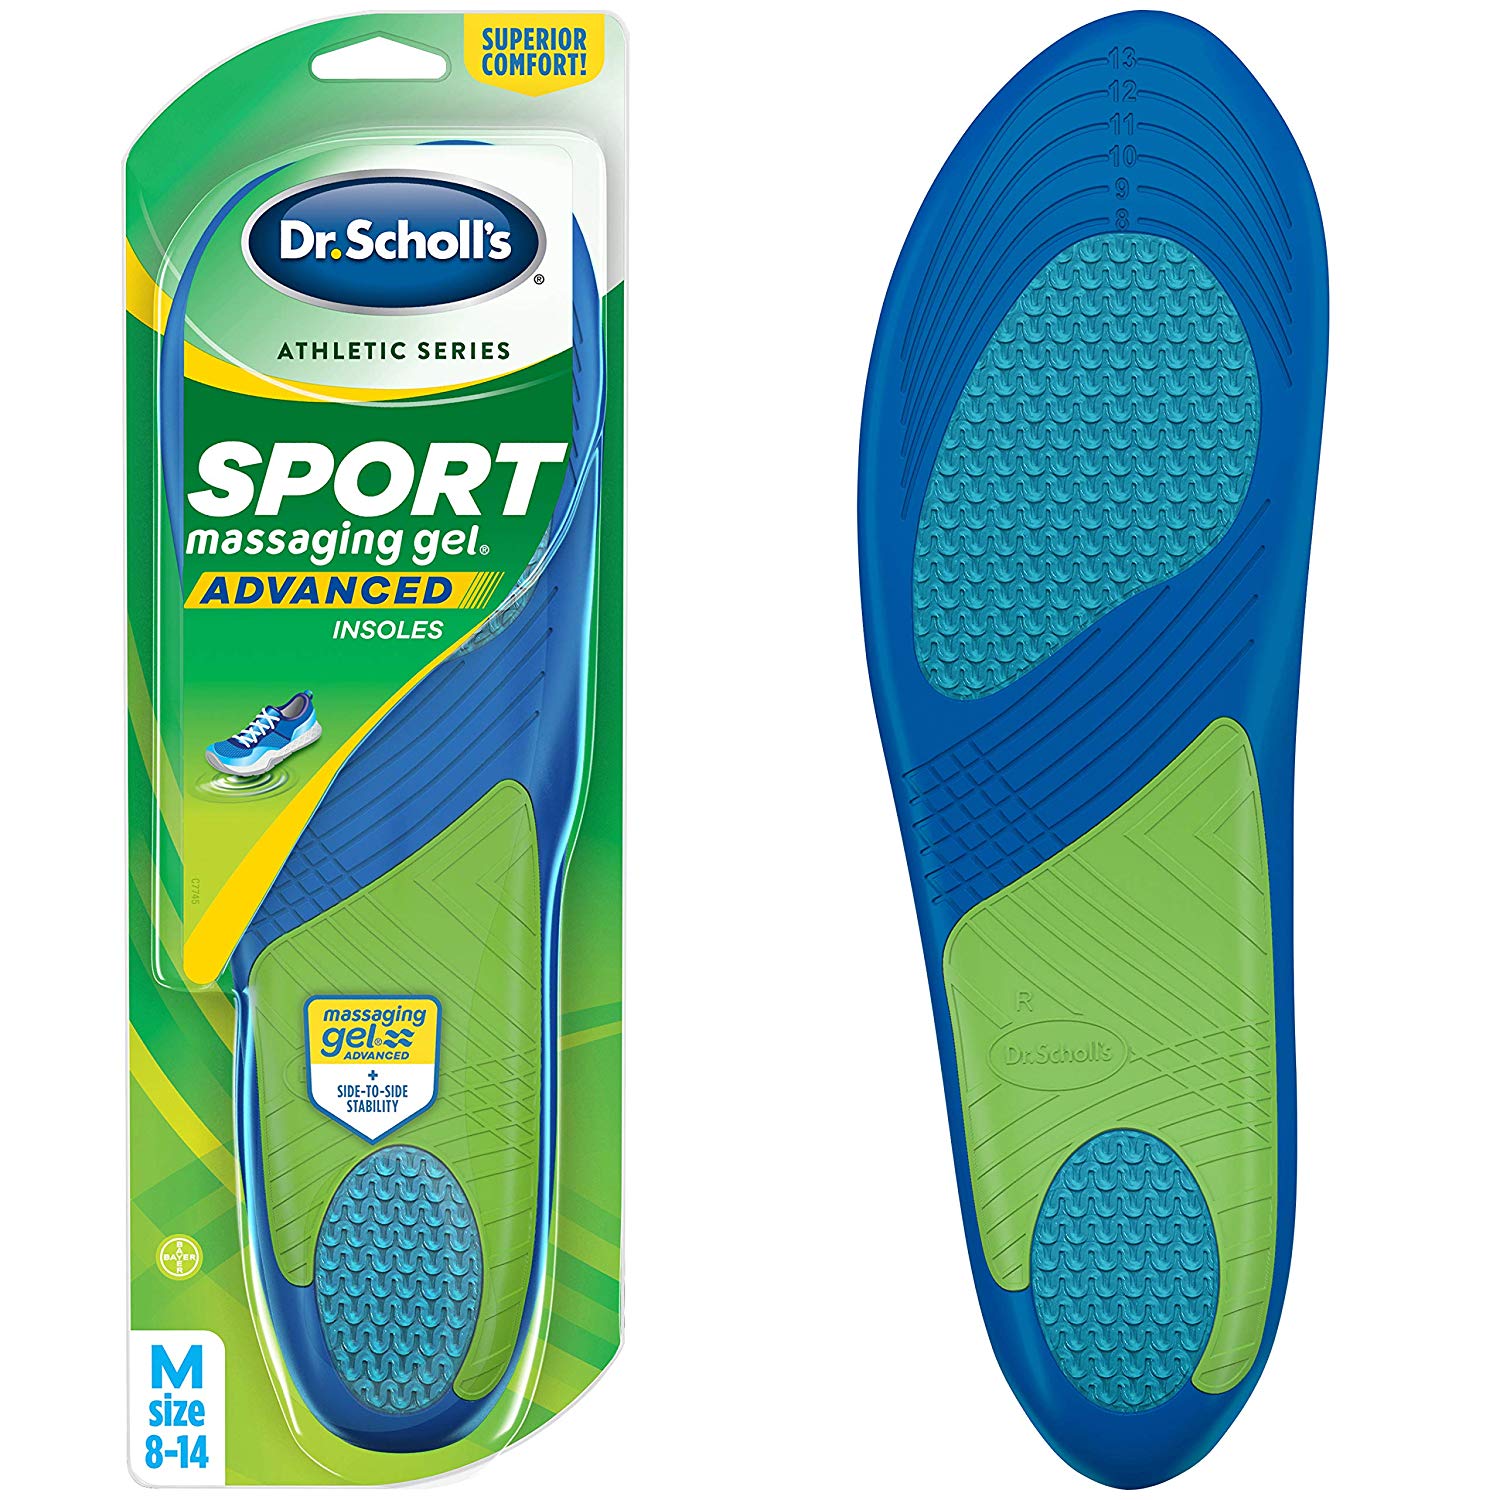 Dr. Scholl’S Sport Massaging Gel Advanced Insoles pack and product